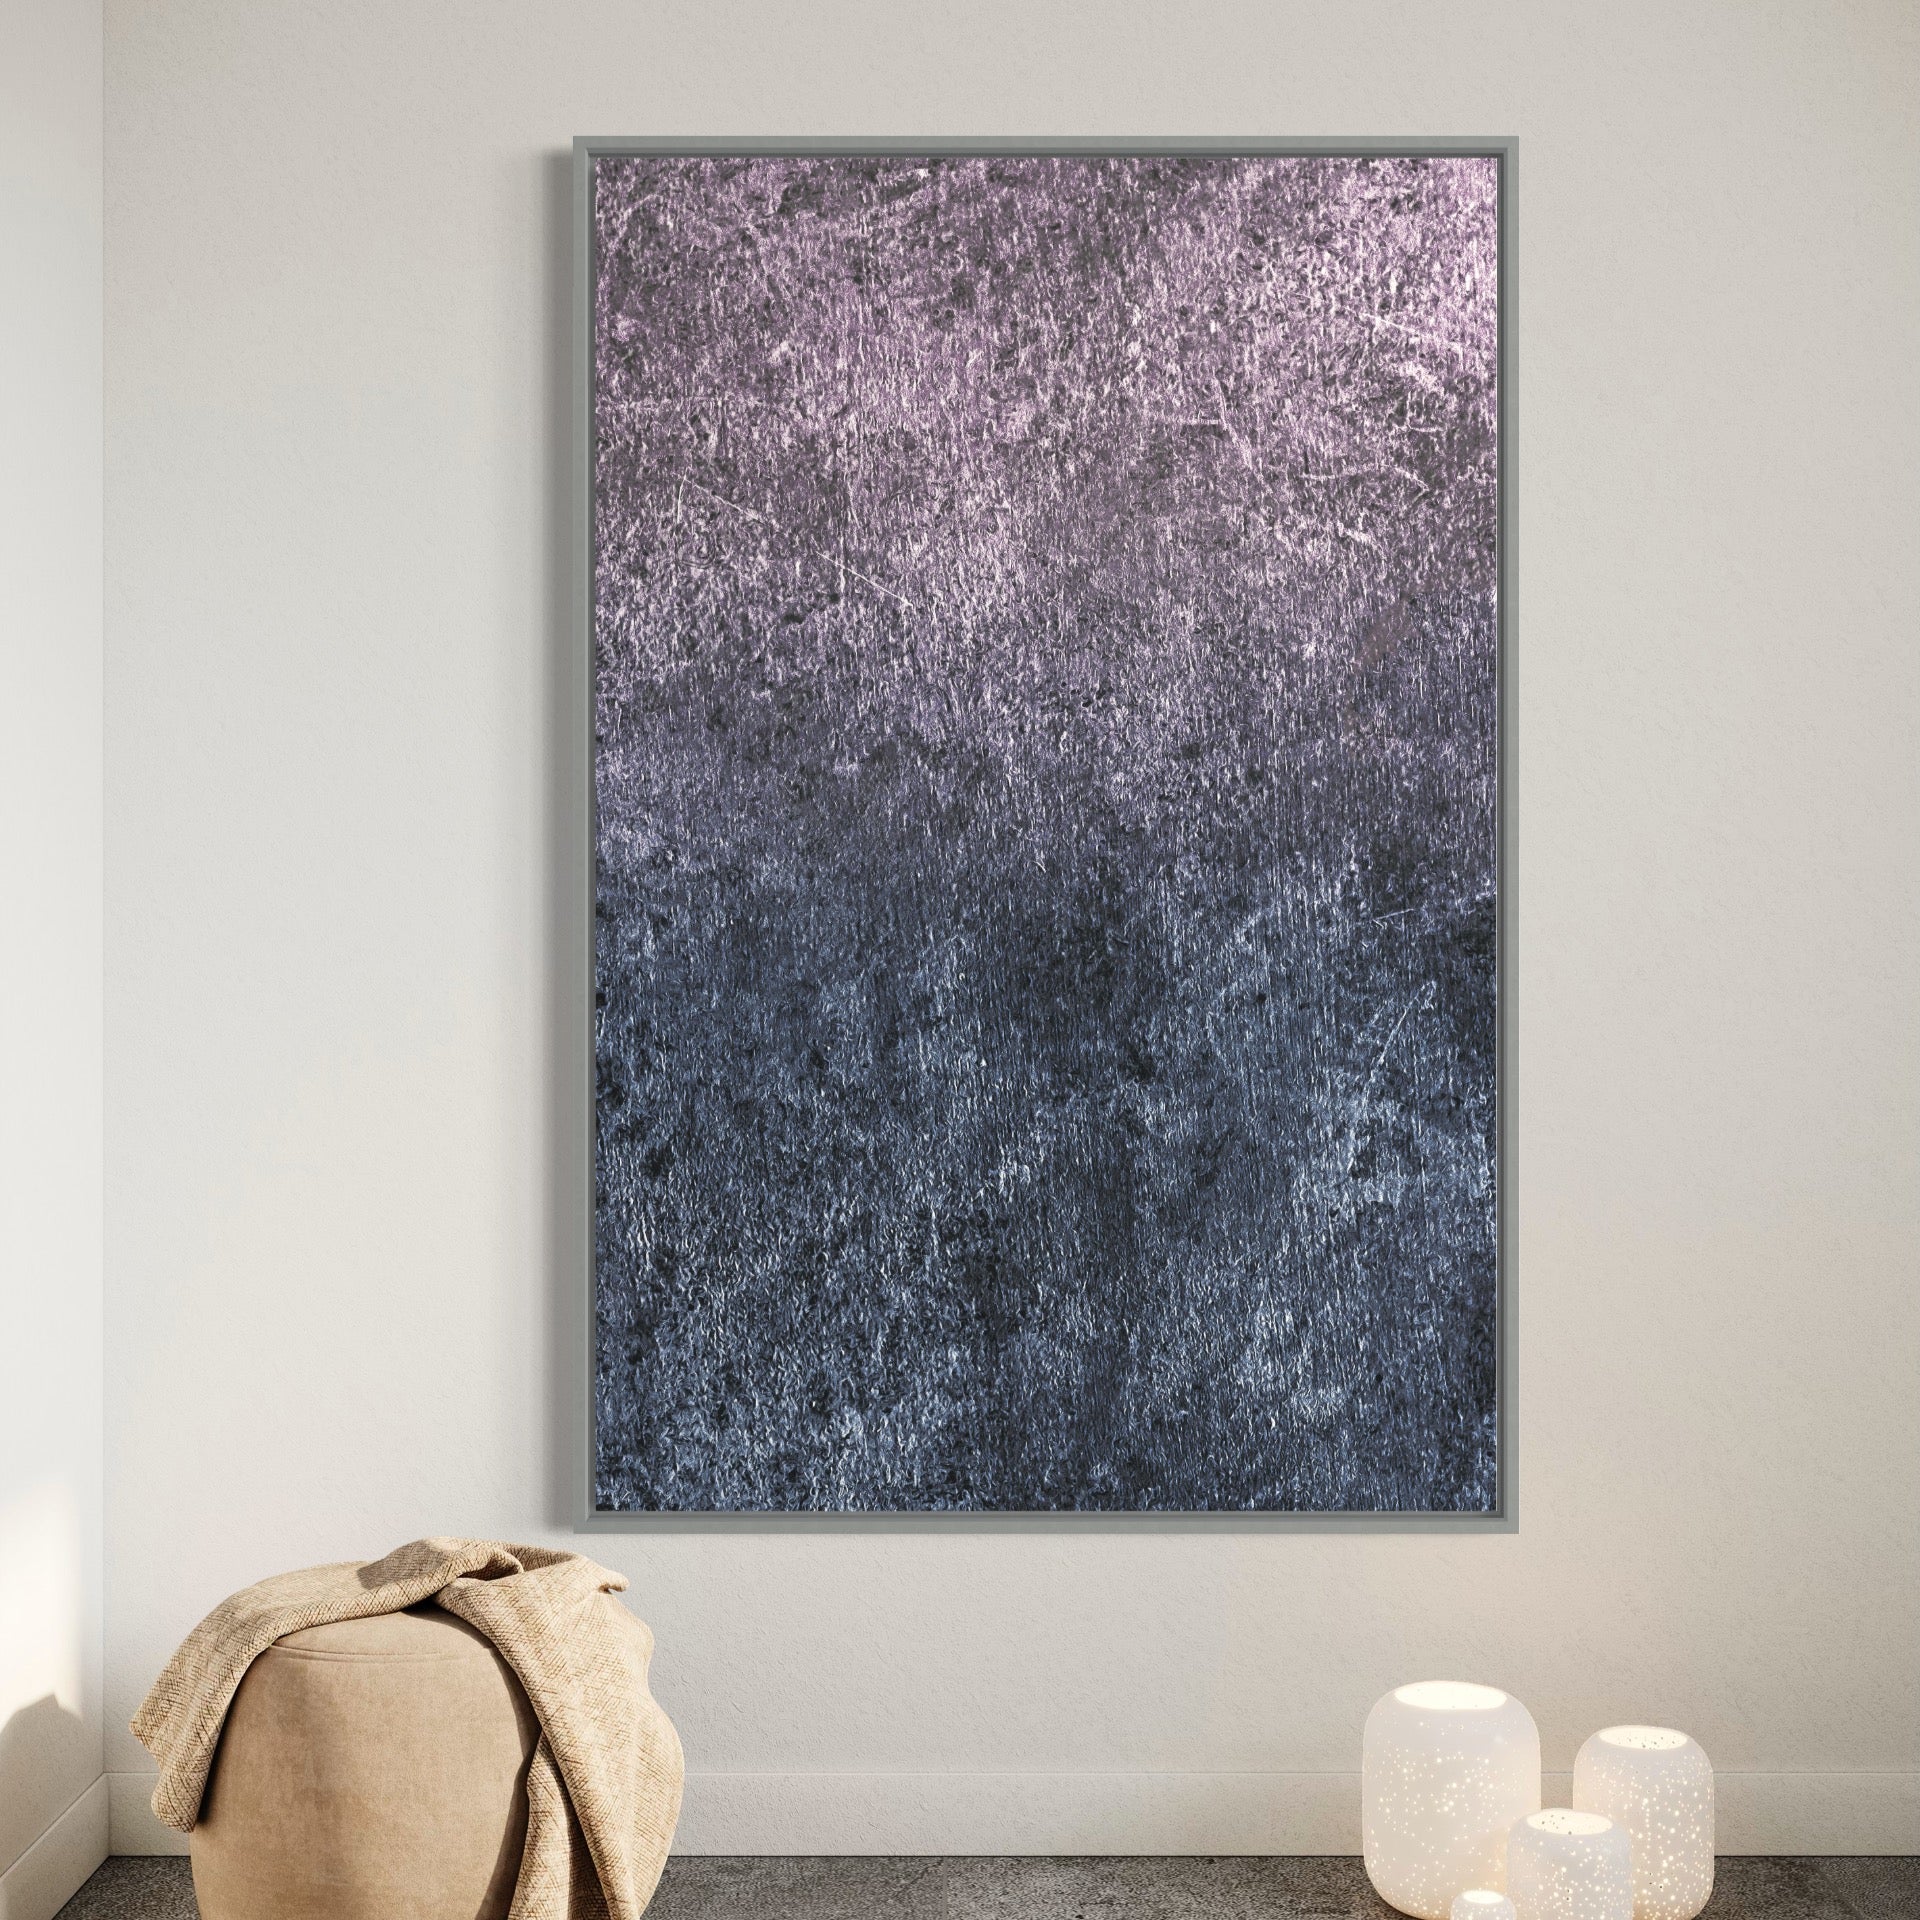 Work 046, Black And Silver / 60x90cm